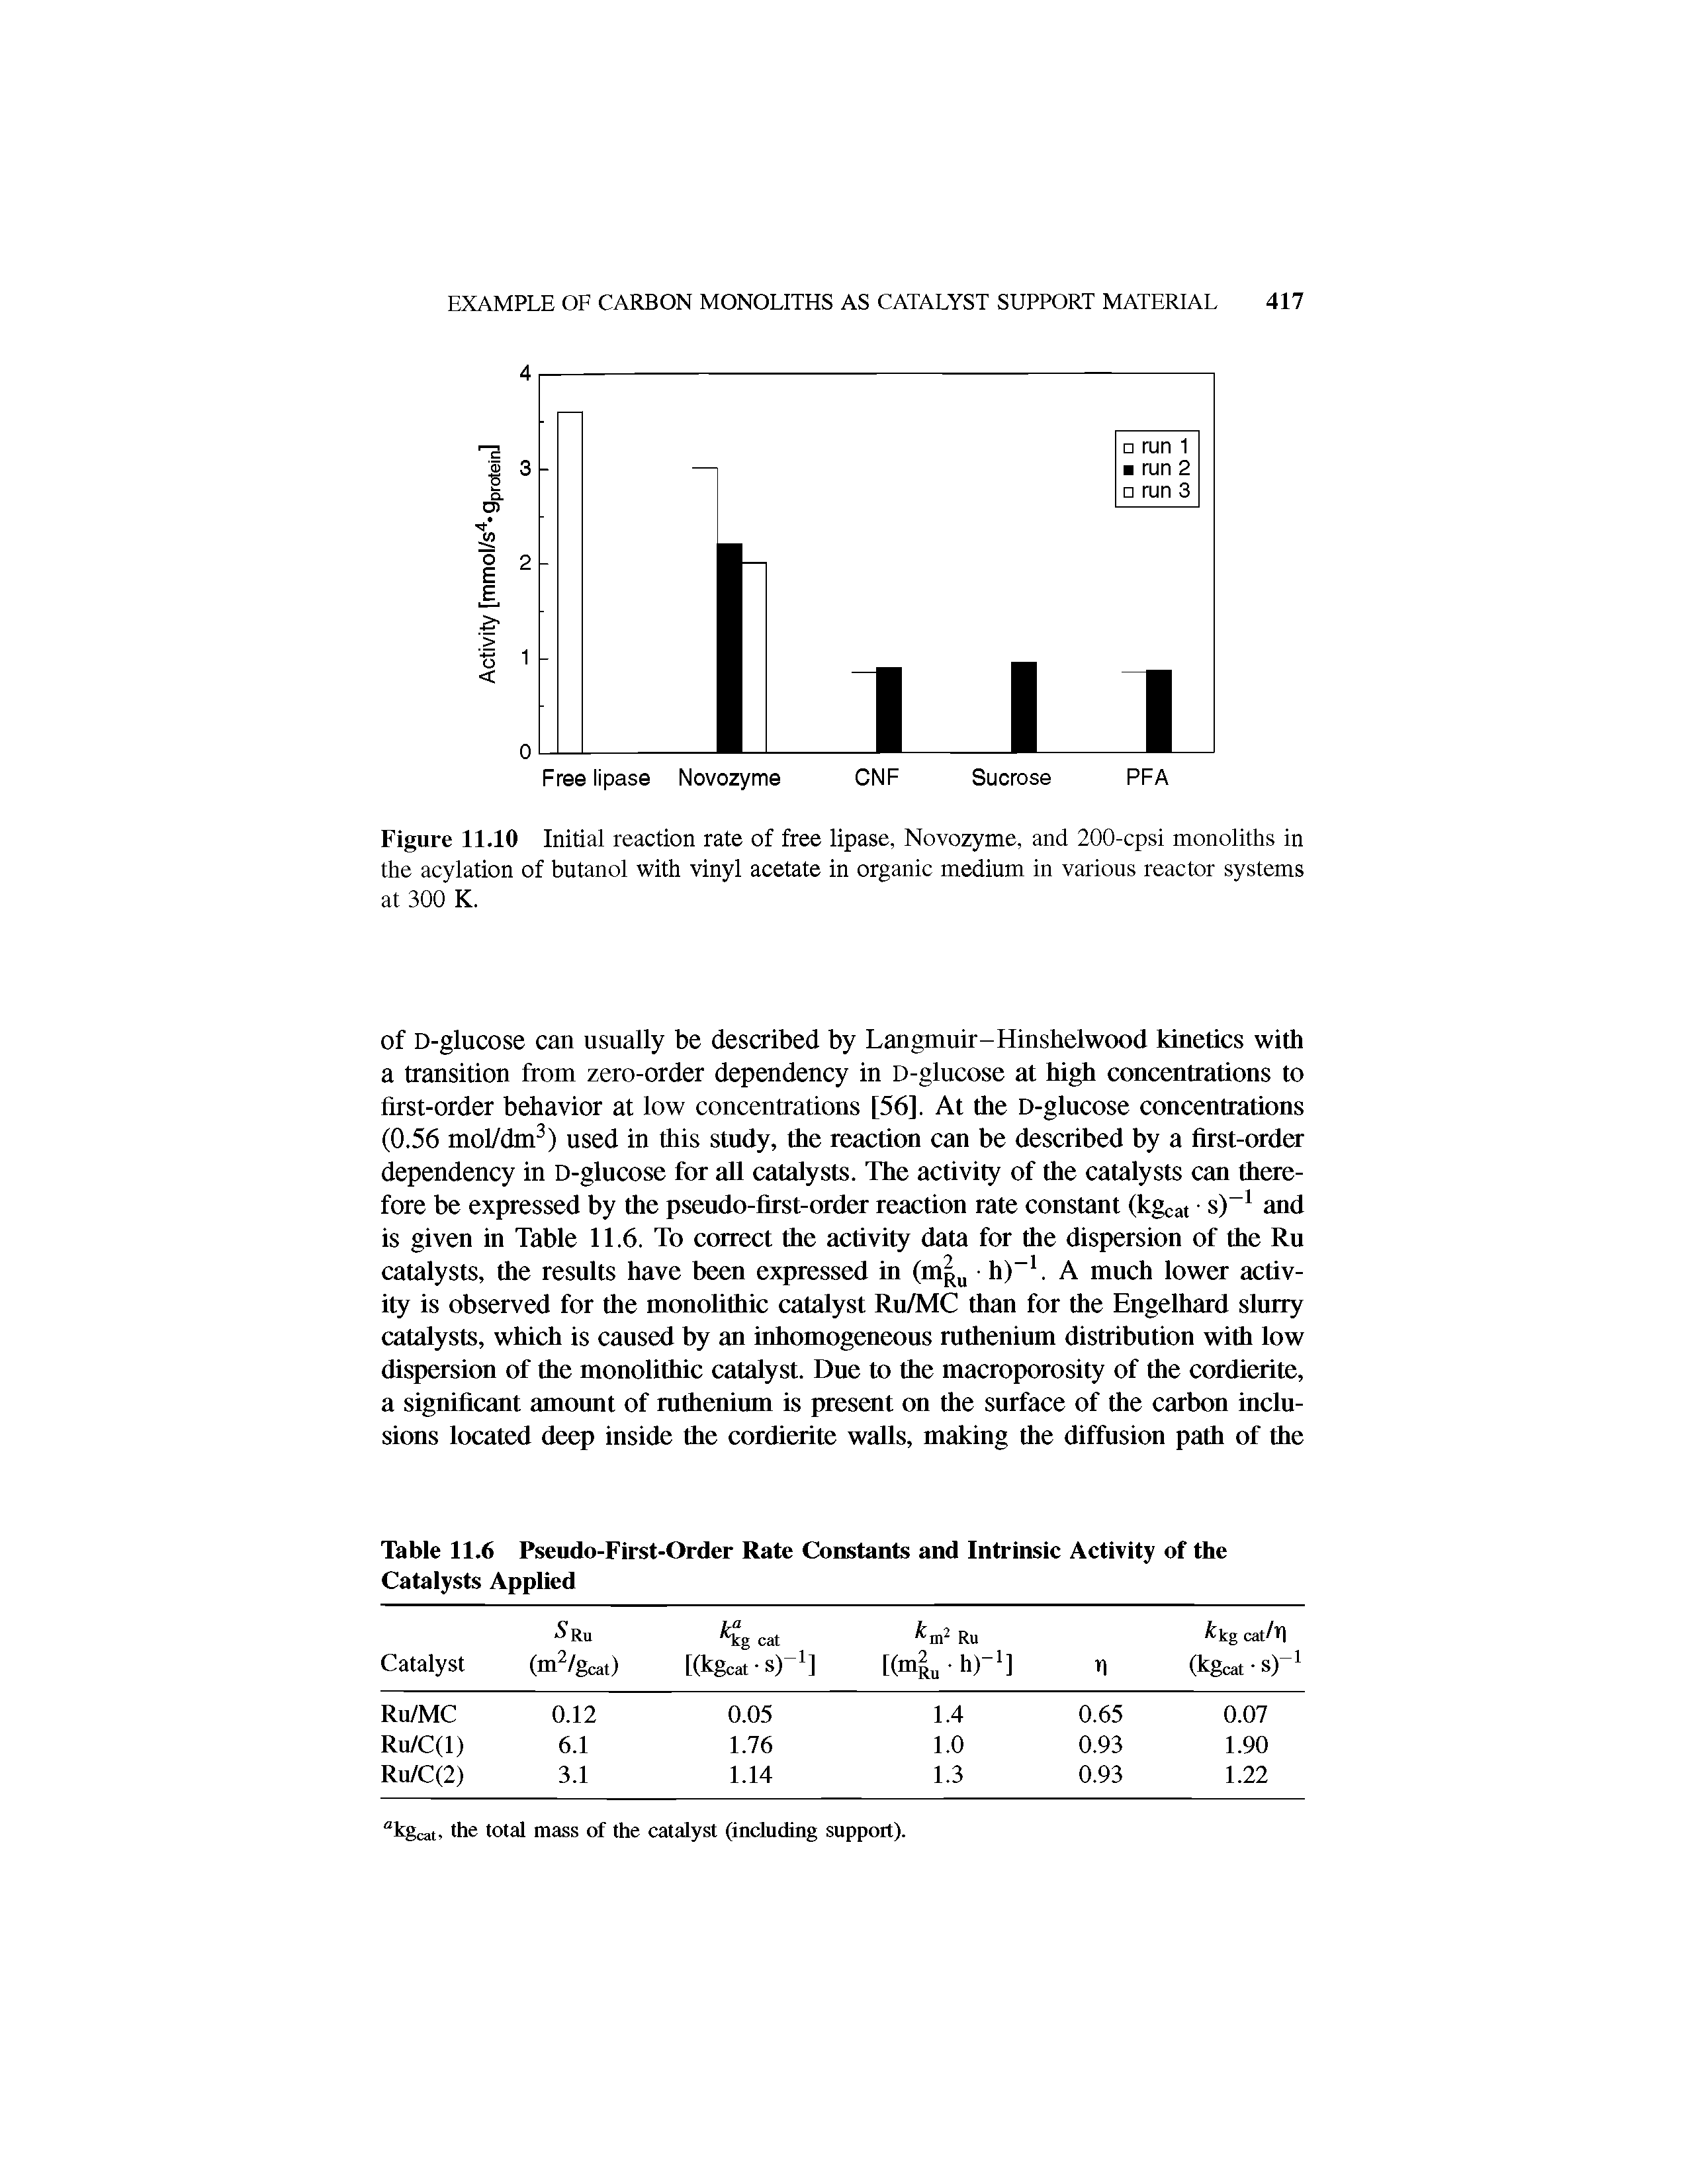 Table 11.6 Pseudo-First-Order Rate Constants and Intrinsic Activity of the Catalysts Applied...